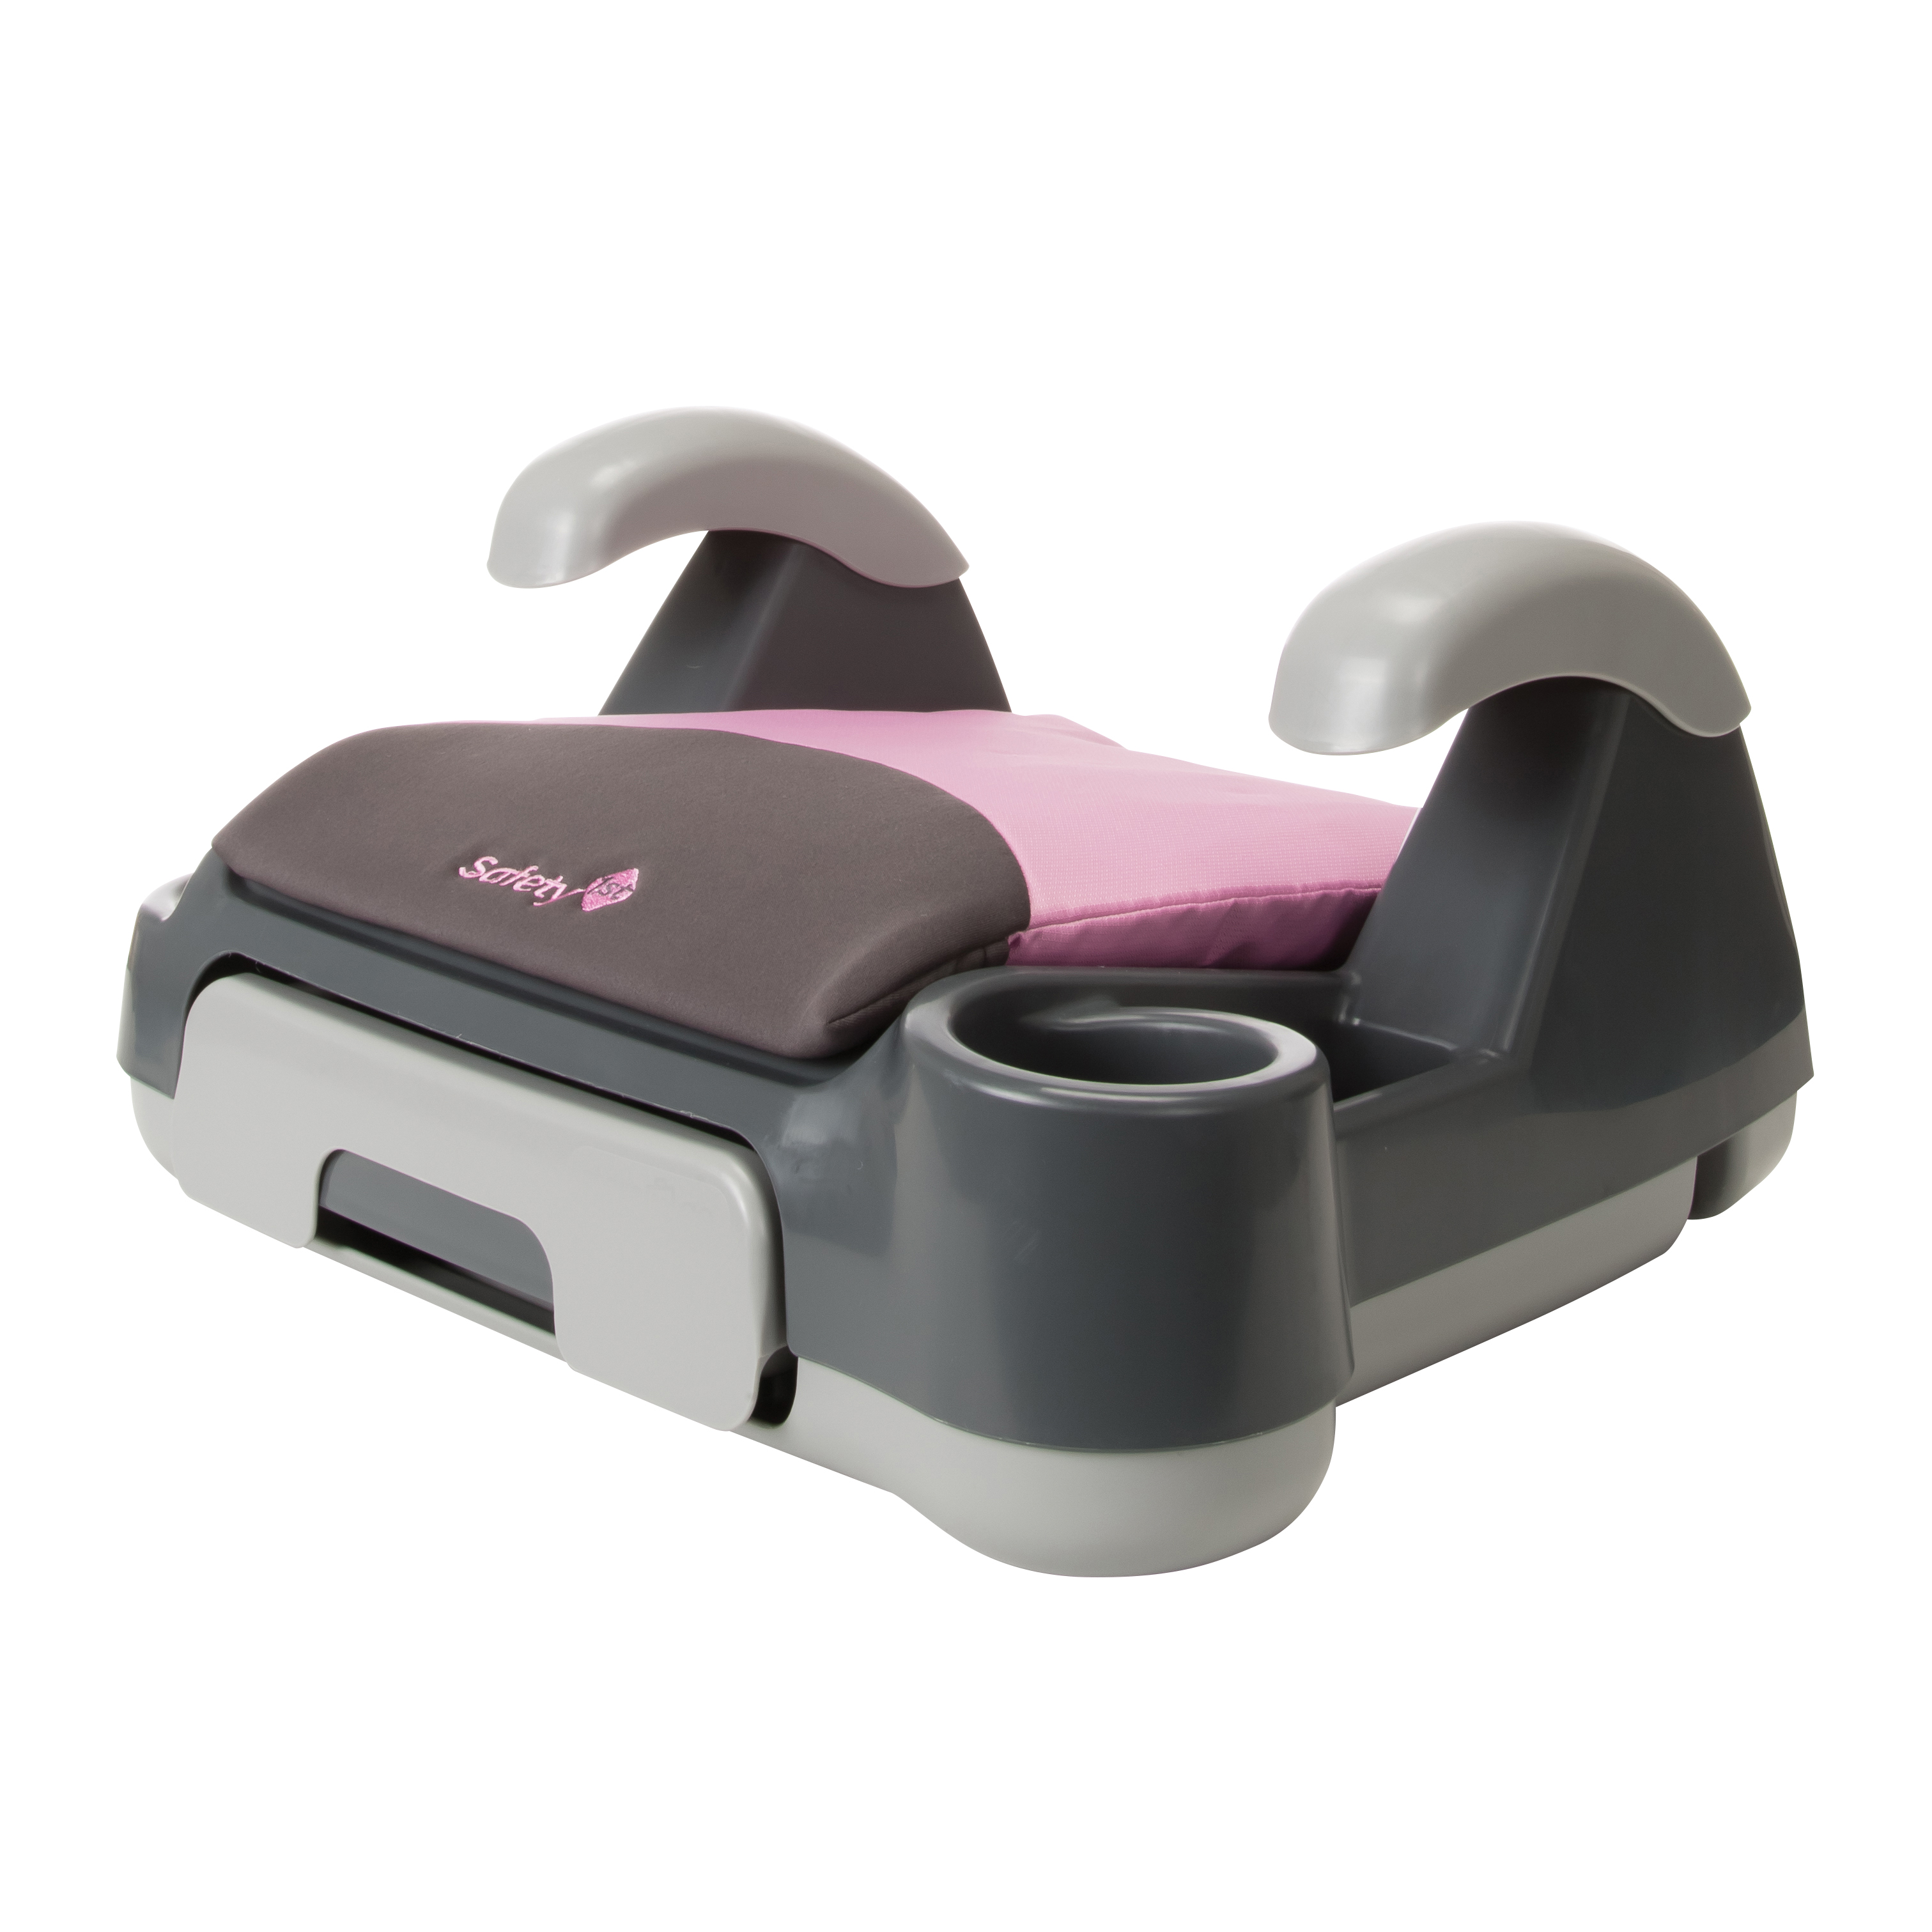 Safety 1st Store 'n Go Belt-Positioning Booster Car Seat, Nora - image 3 of 5